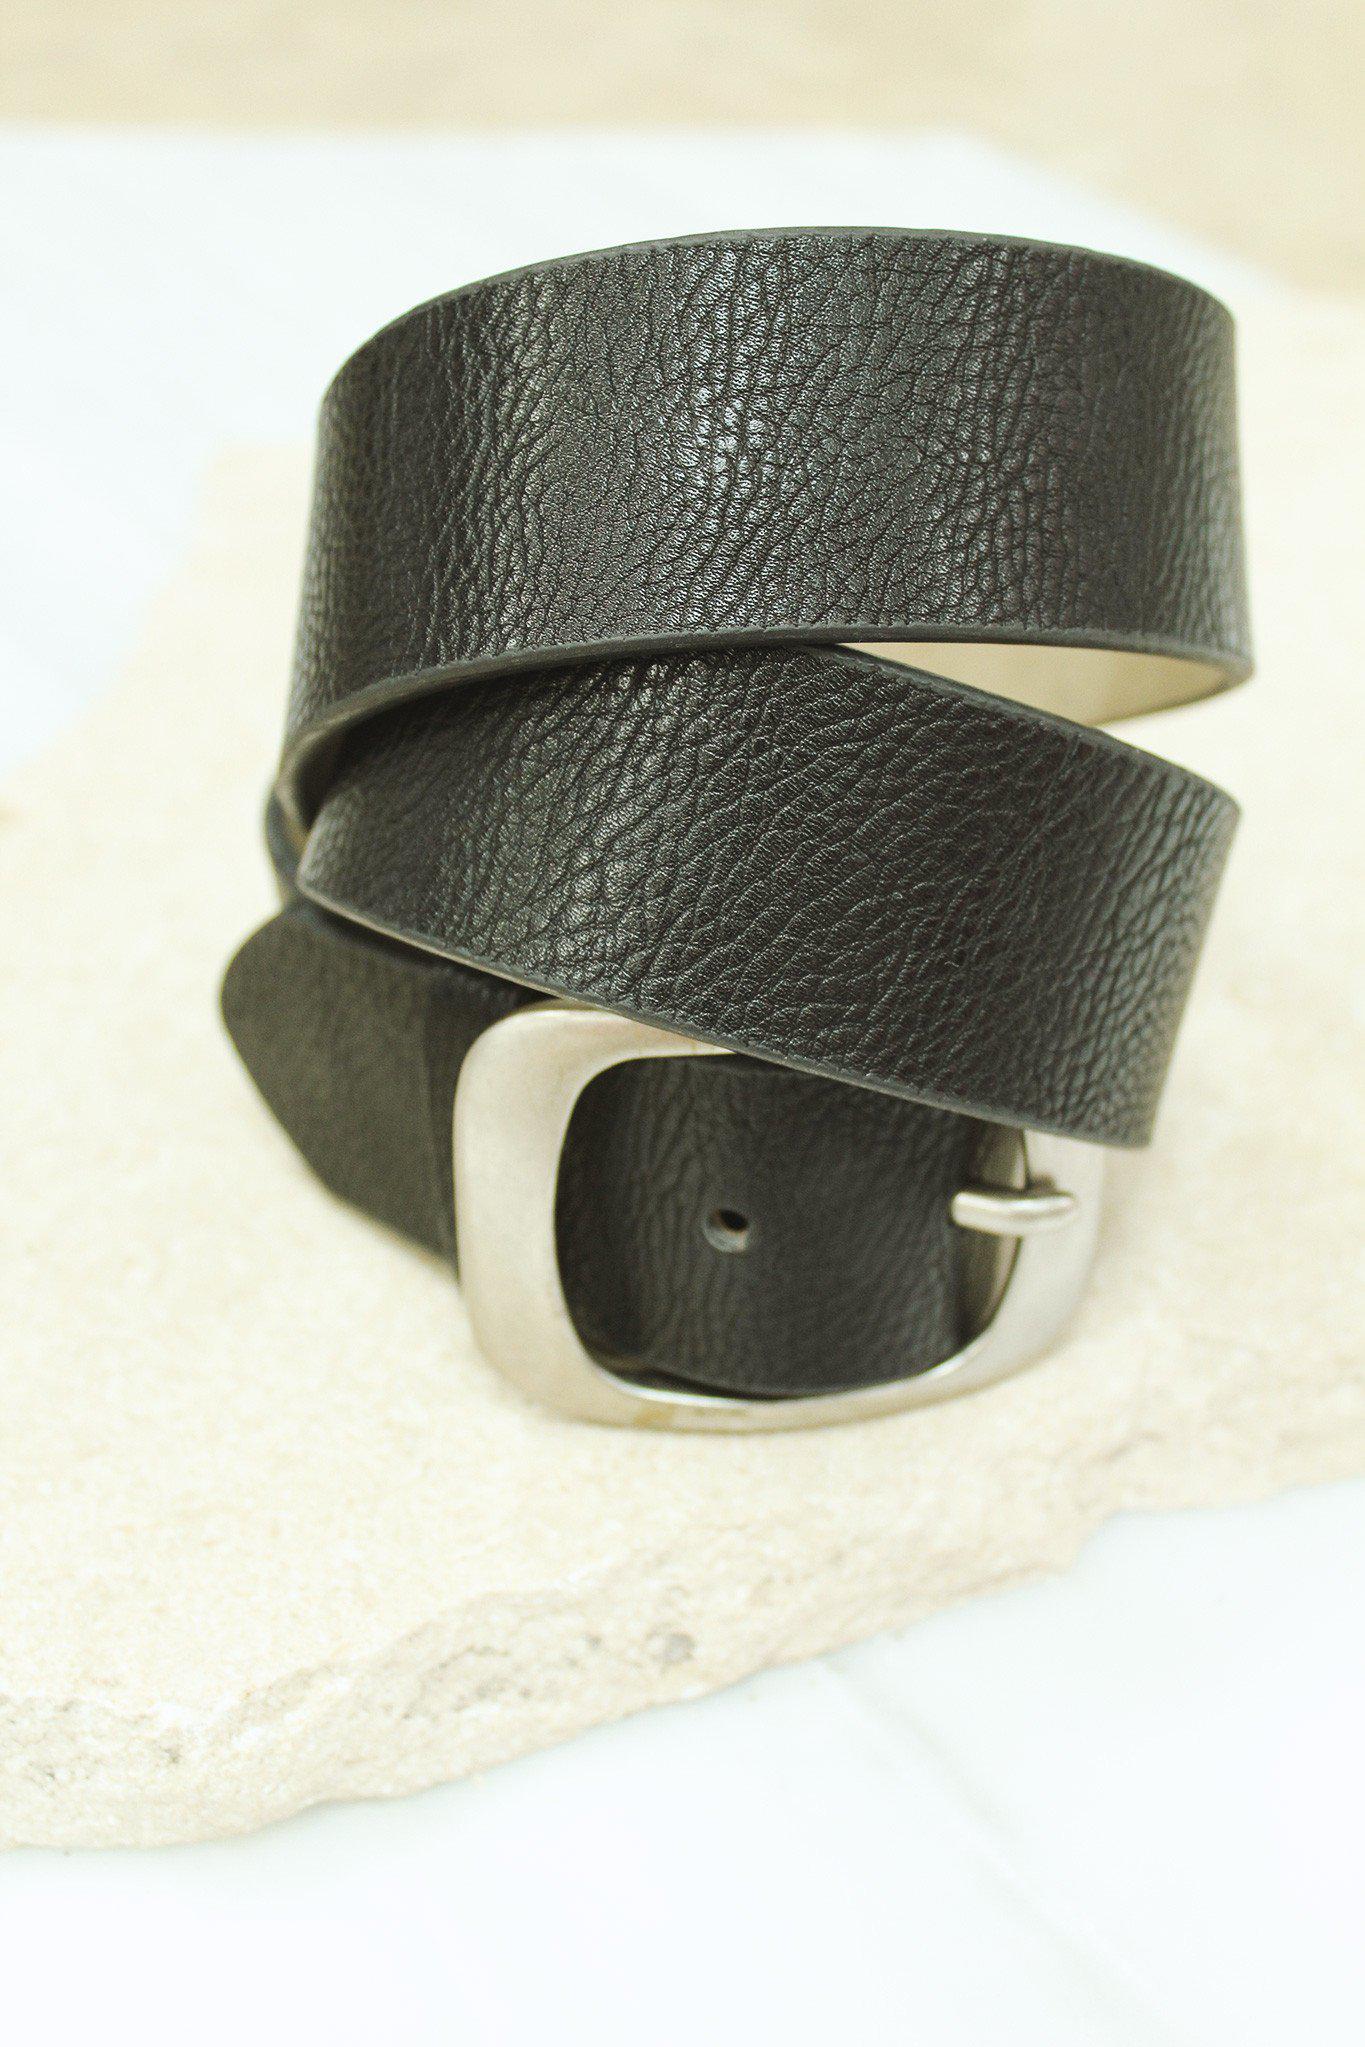 Black Belt With Silver Buckle